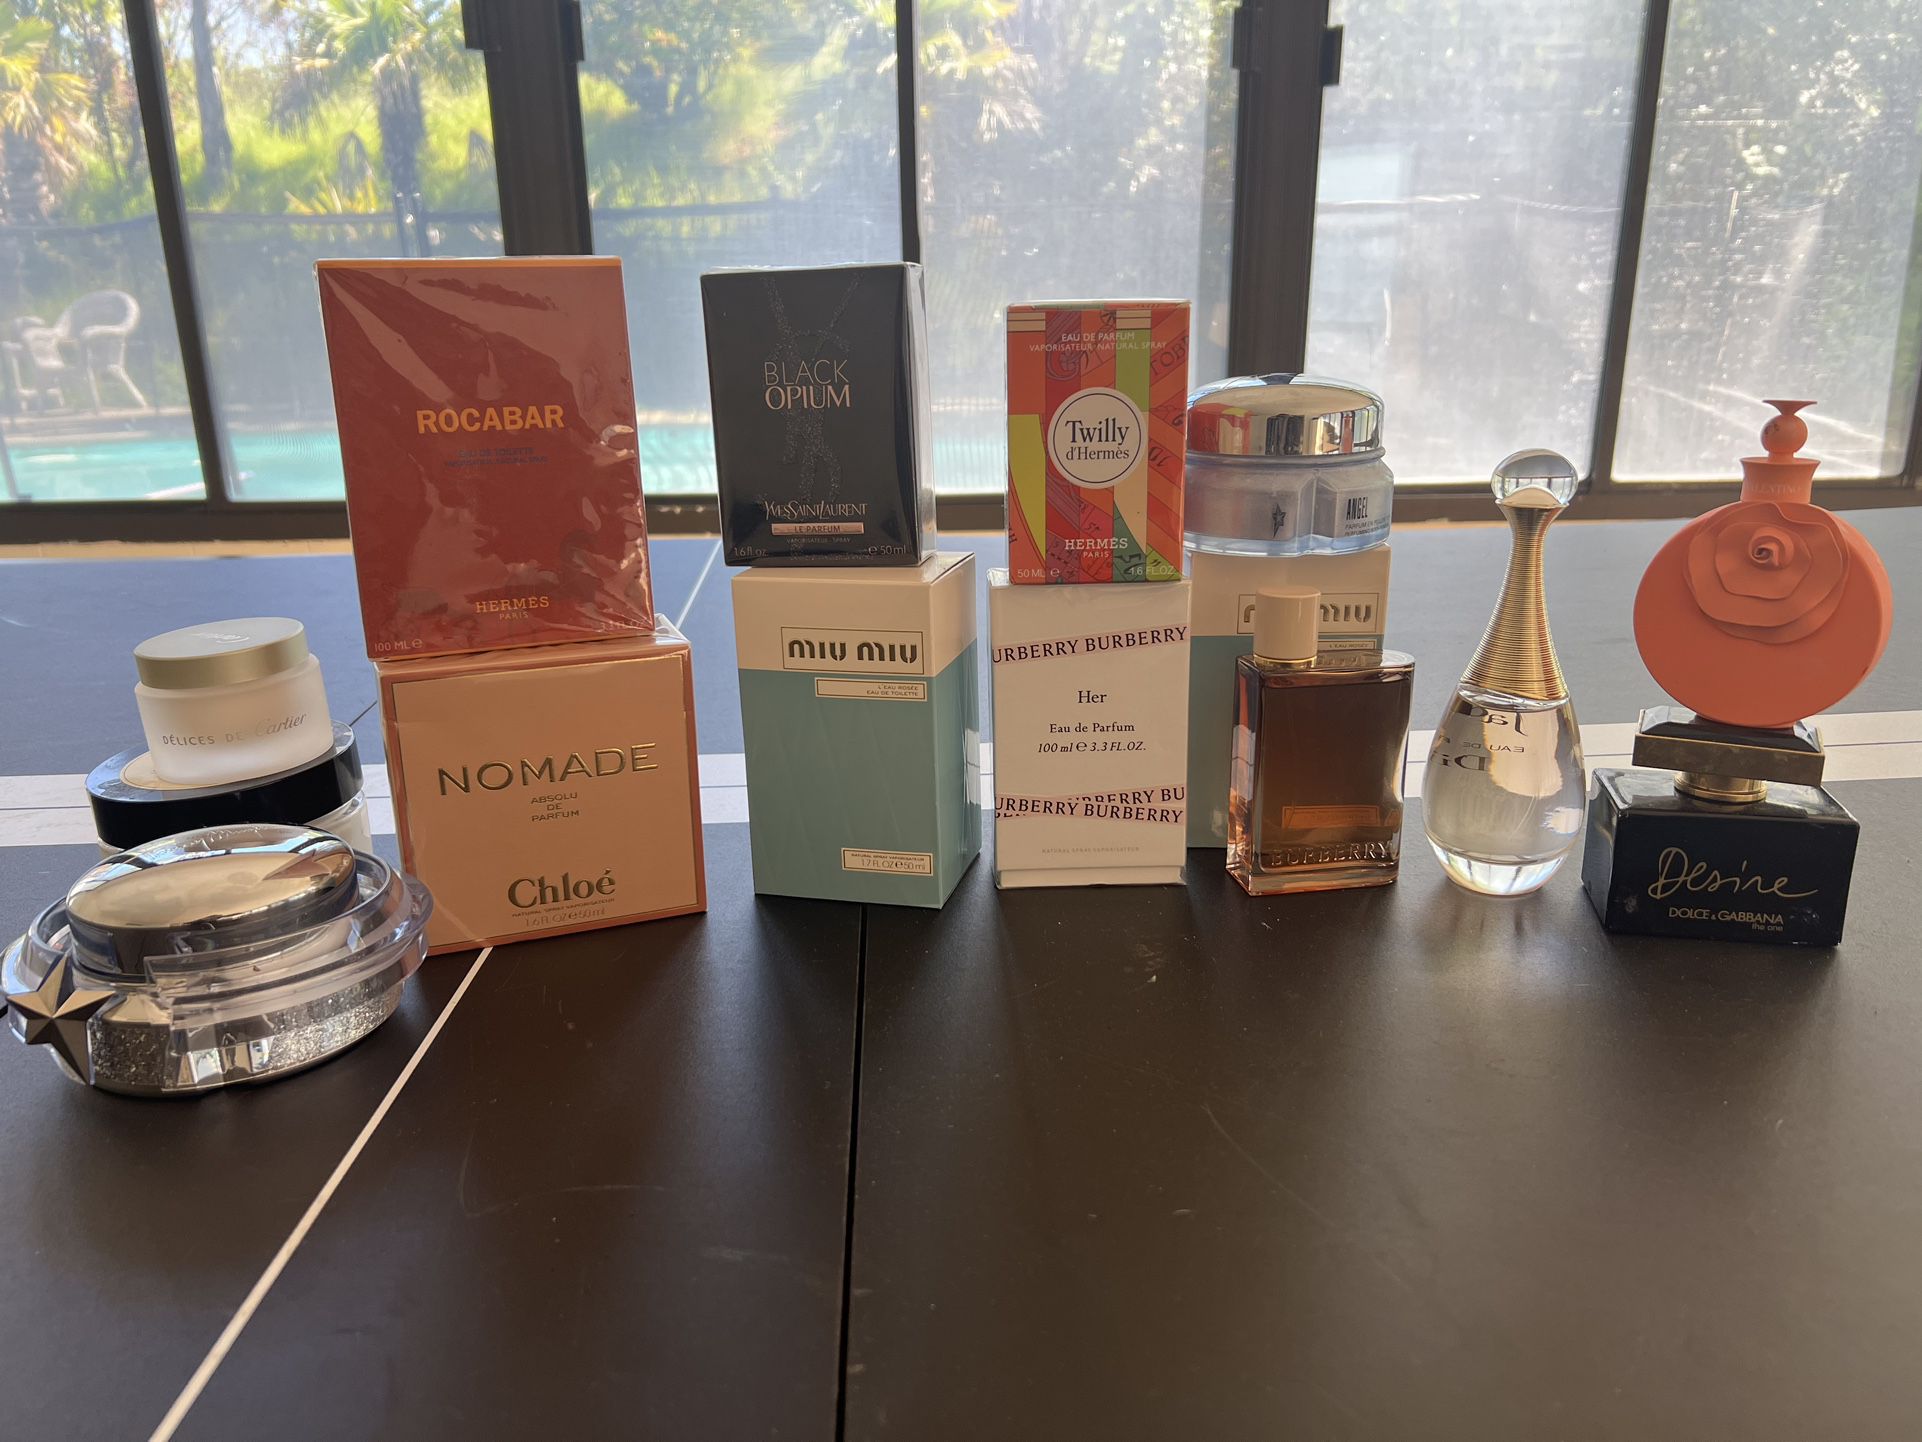 Designer Fragrances And Lotions Selling As A Lot $800